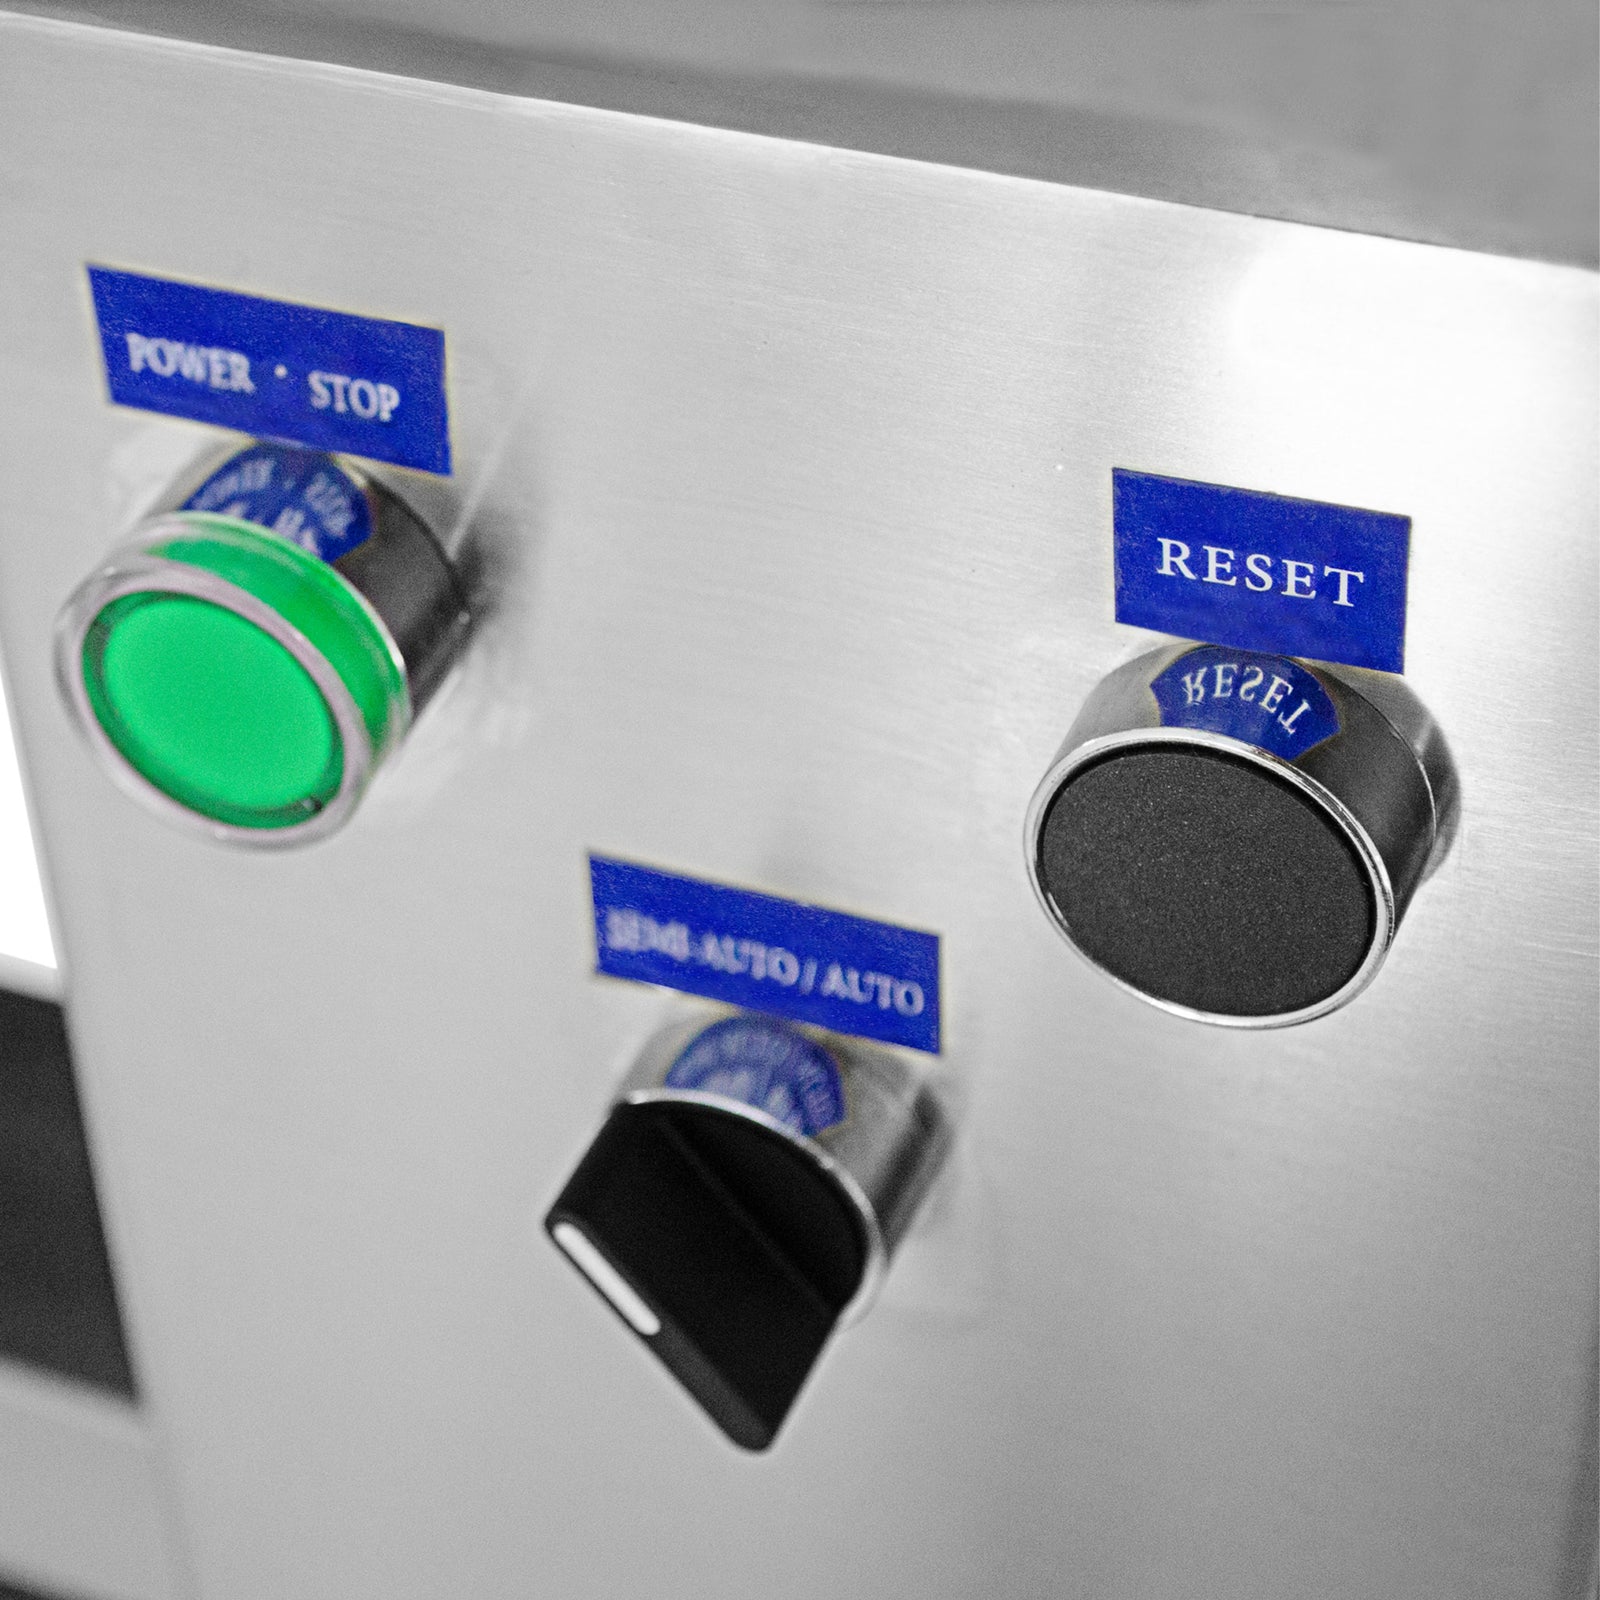 Close-up of the user-friendly control panel. The panel includes an ON/OFF, Reset, and Semi-Automatic and Auto switch knobs.